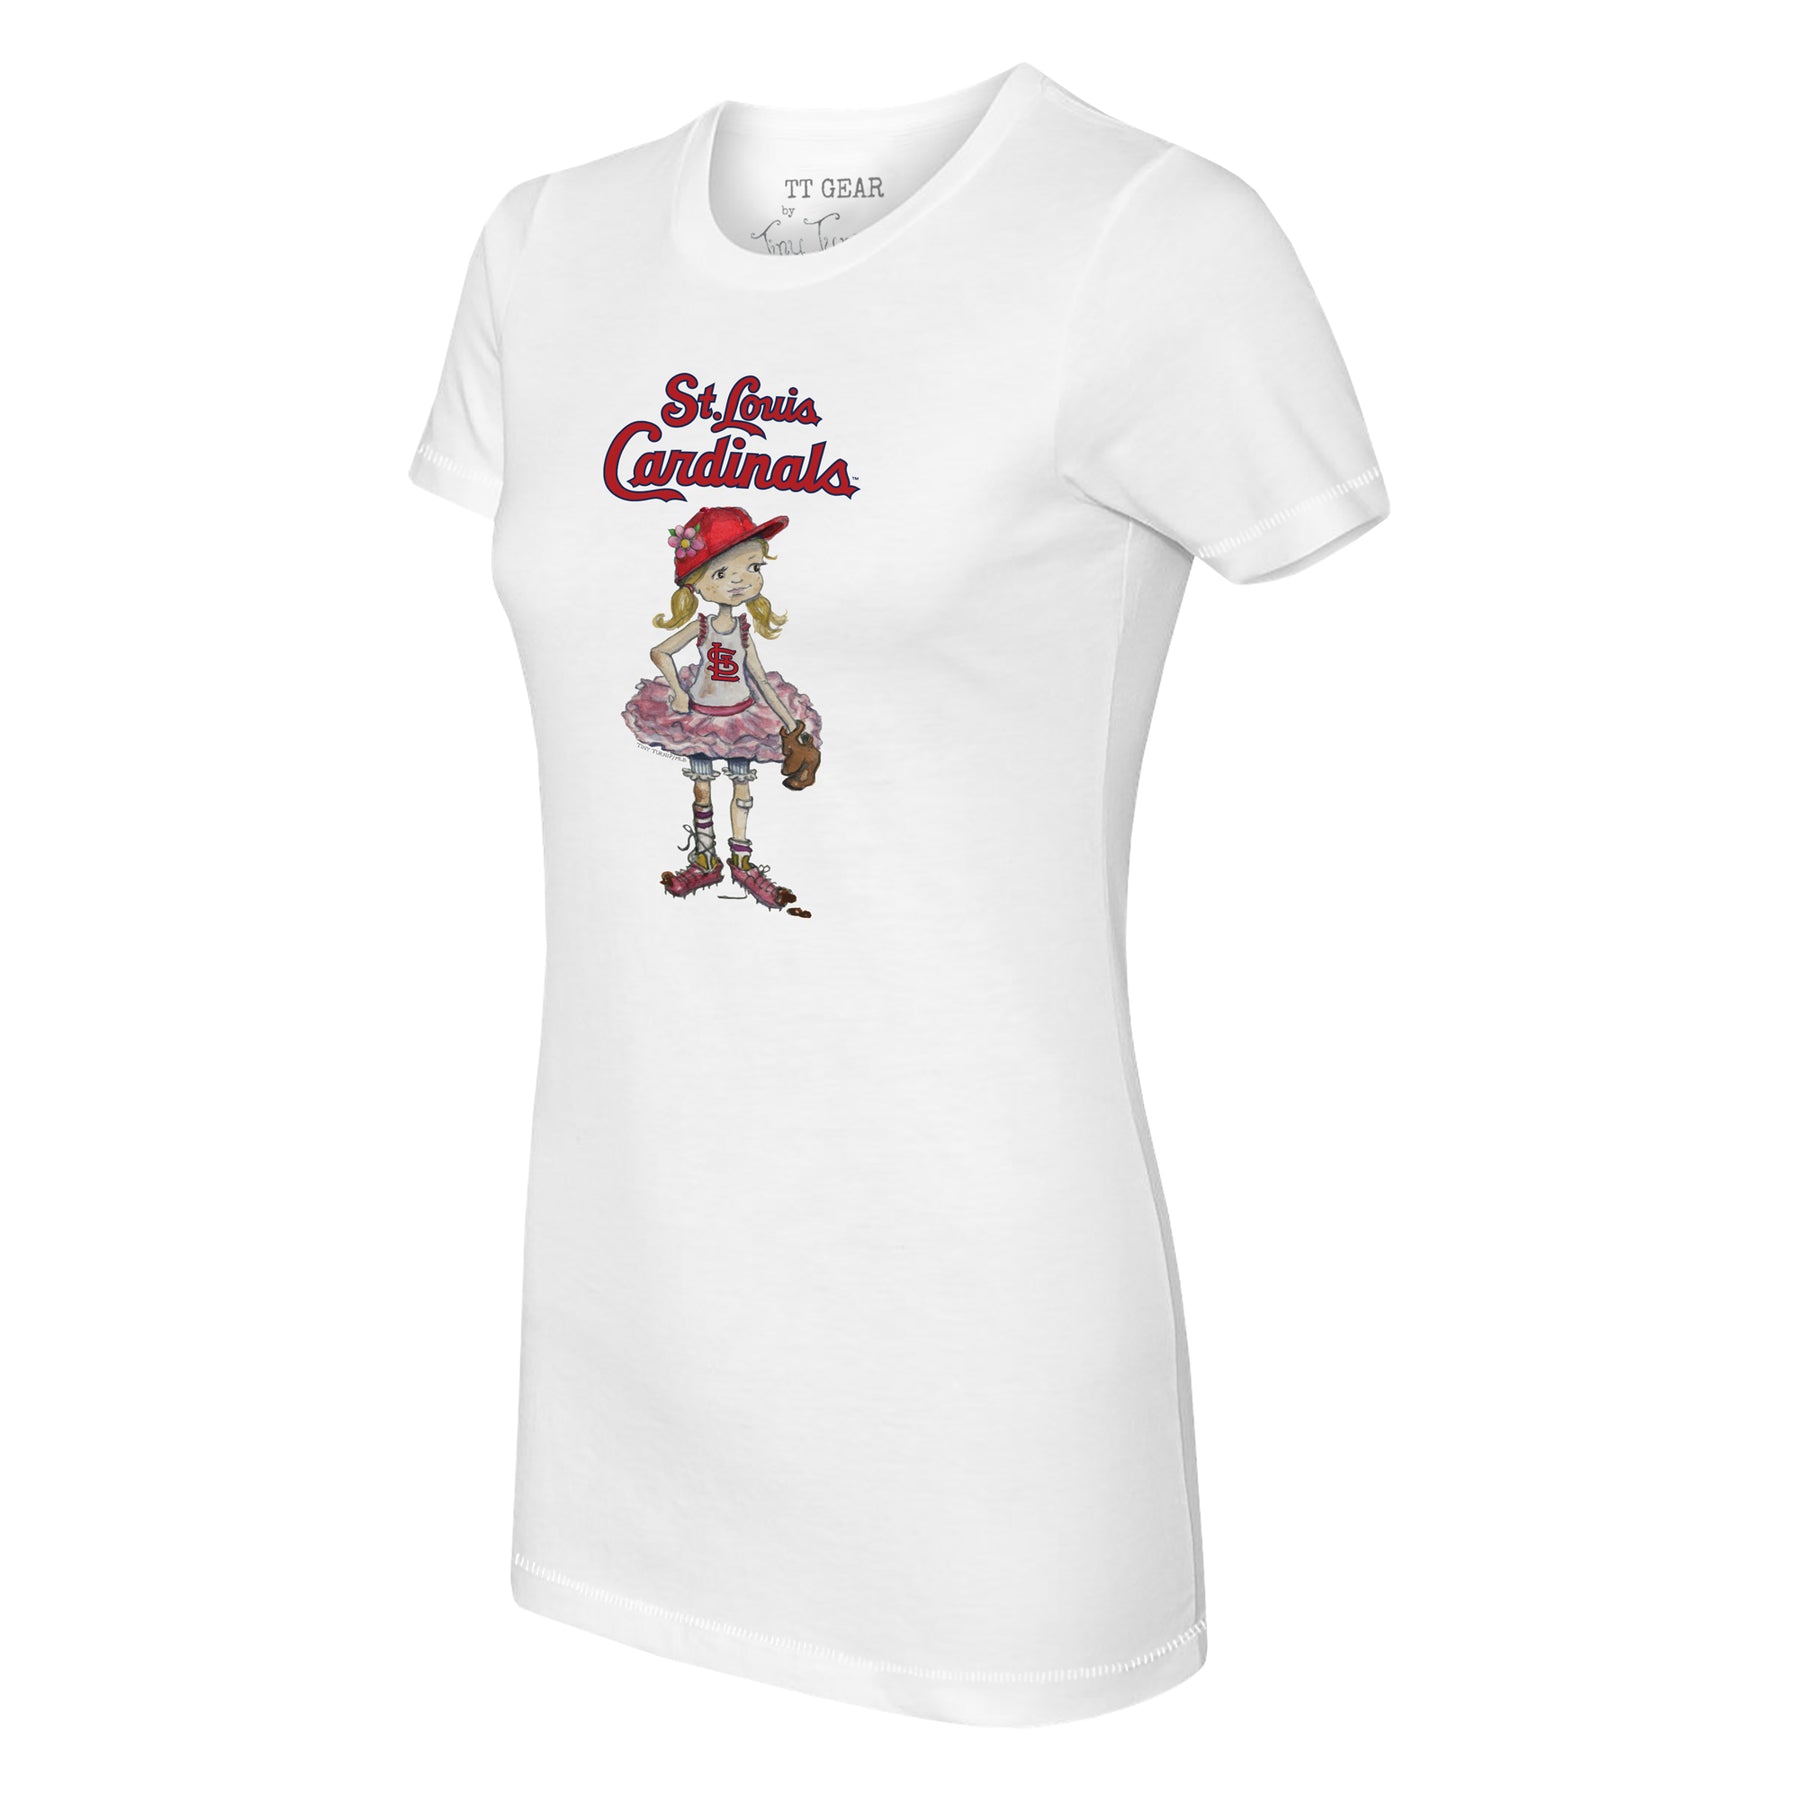 Toddler Tiny Turnip White St. Louis Cardinals Heart Banner T-Shirt Size:3T